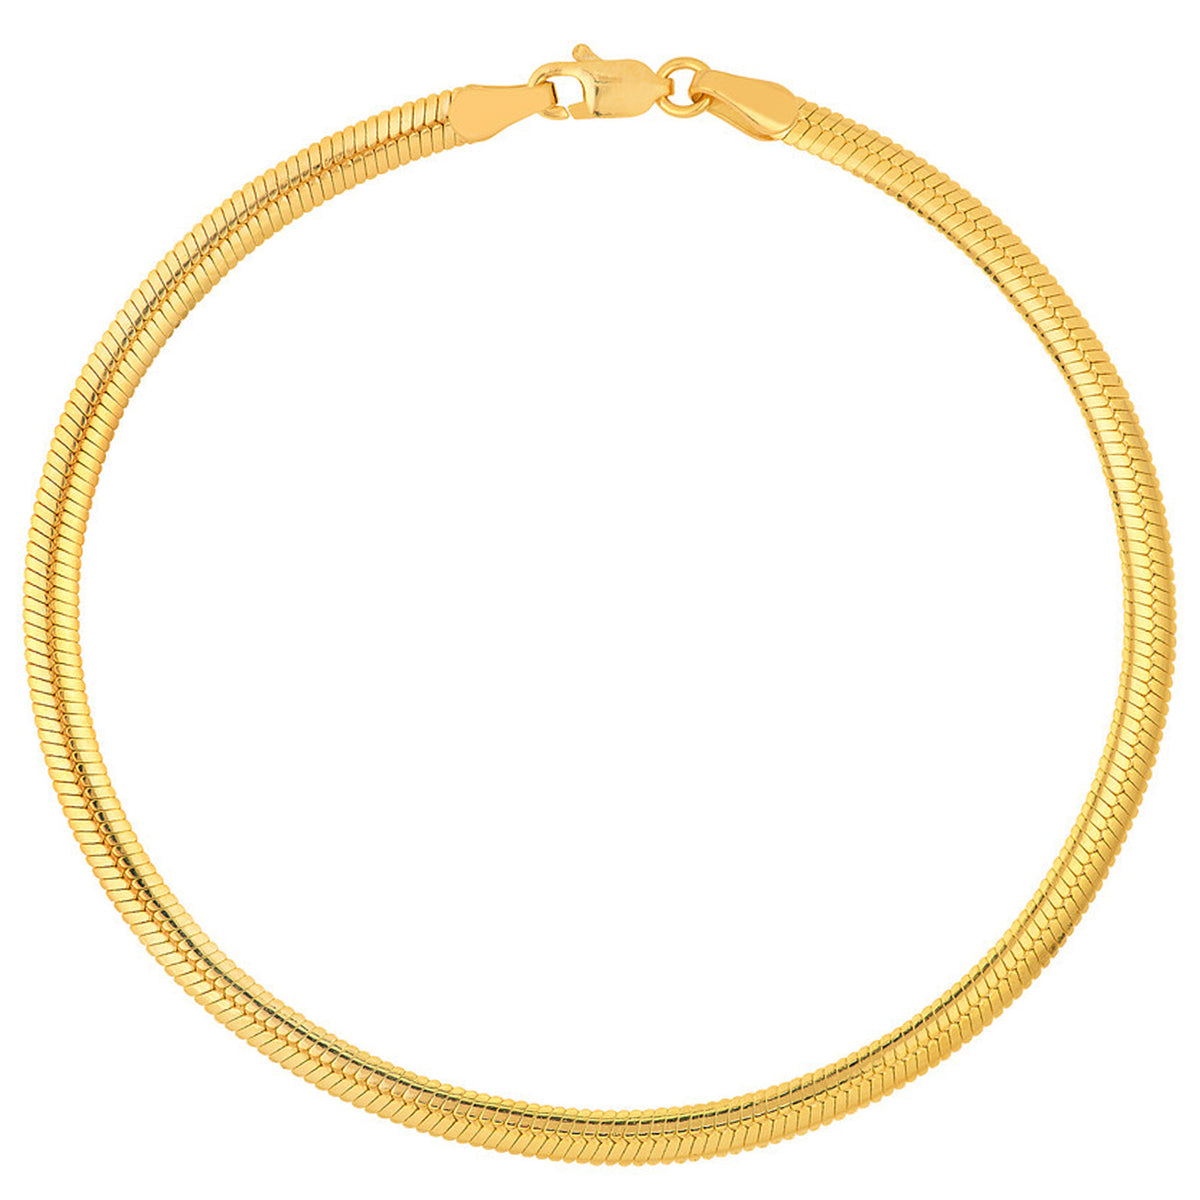 14K Yellow Gold 4mm Light Oval Snake Chain Herringbone Bracelet with Lobster Lock, 7.5 Inches